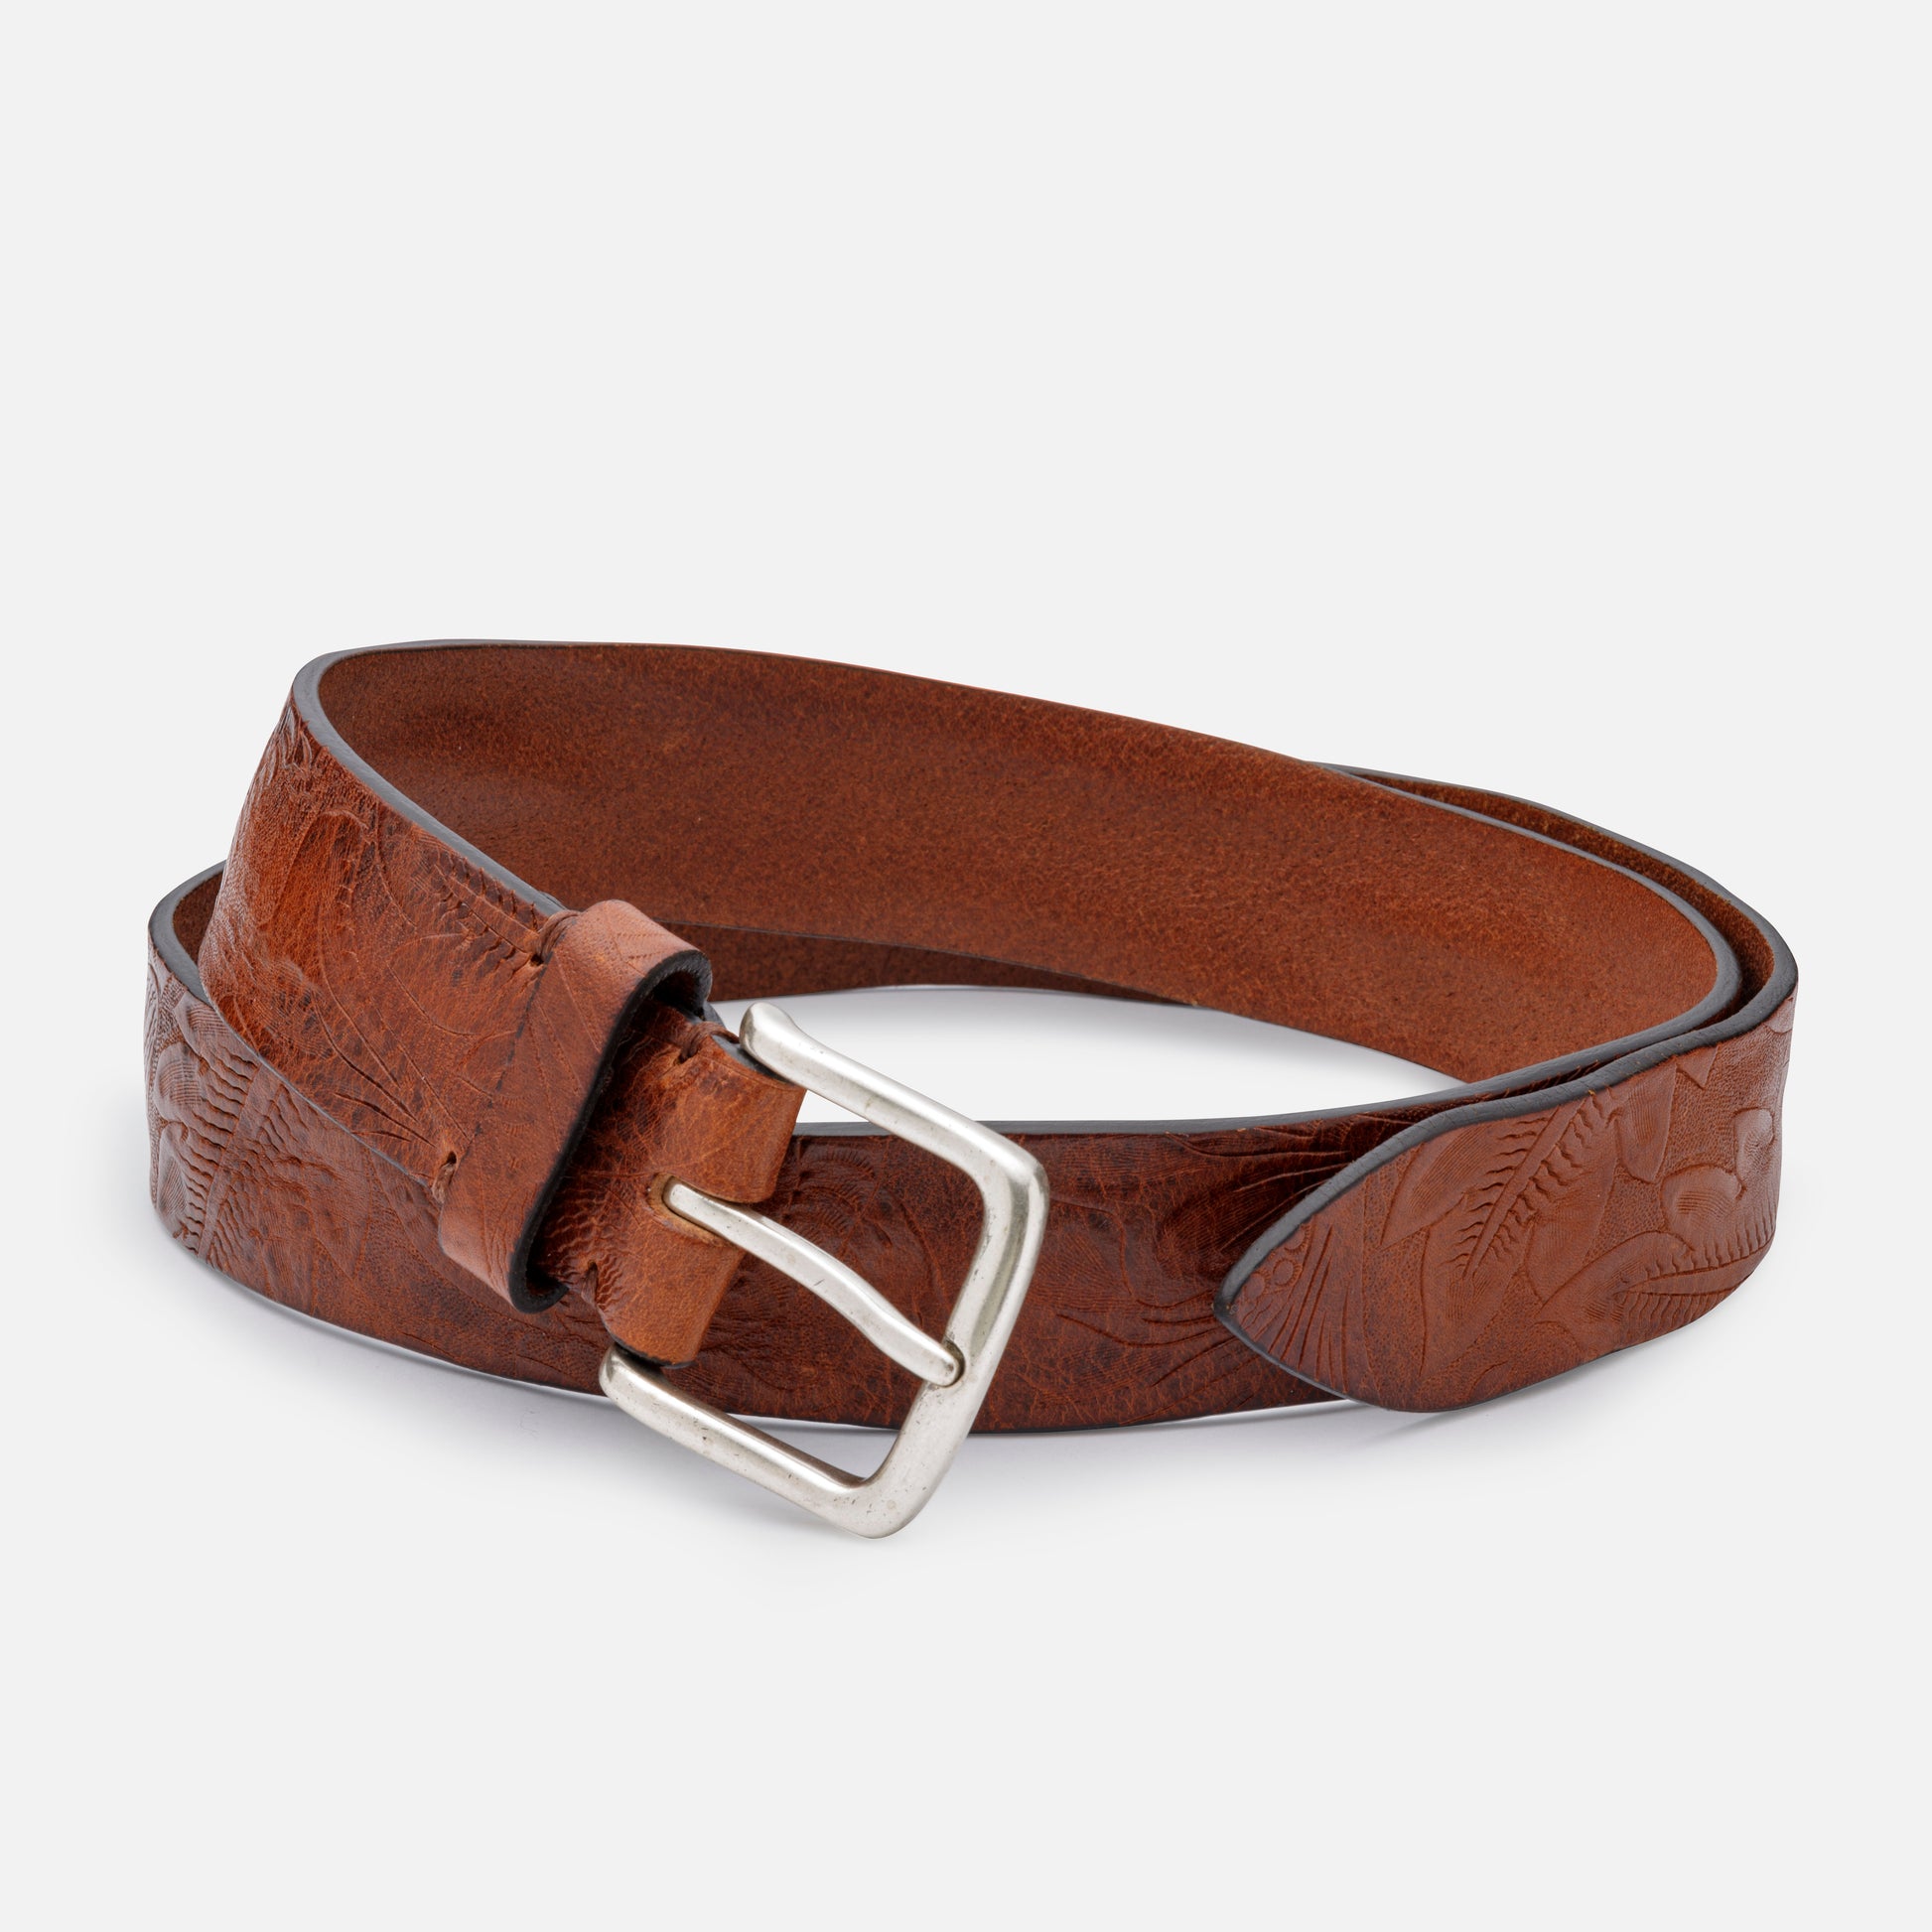 LIGHT BROWN WESTERN LEATHER BELTS WITH CARVINGS AND SILVER BUCKLE  H 3,5 cm